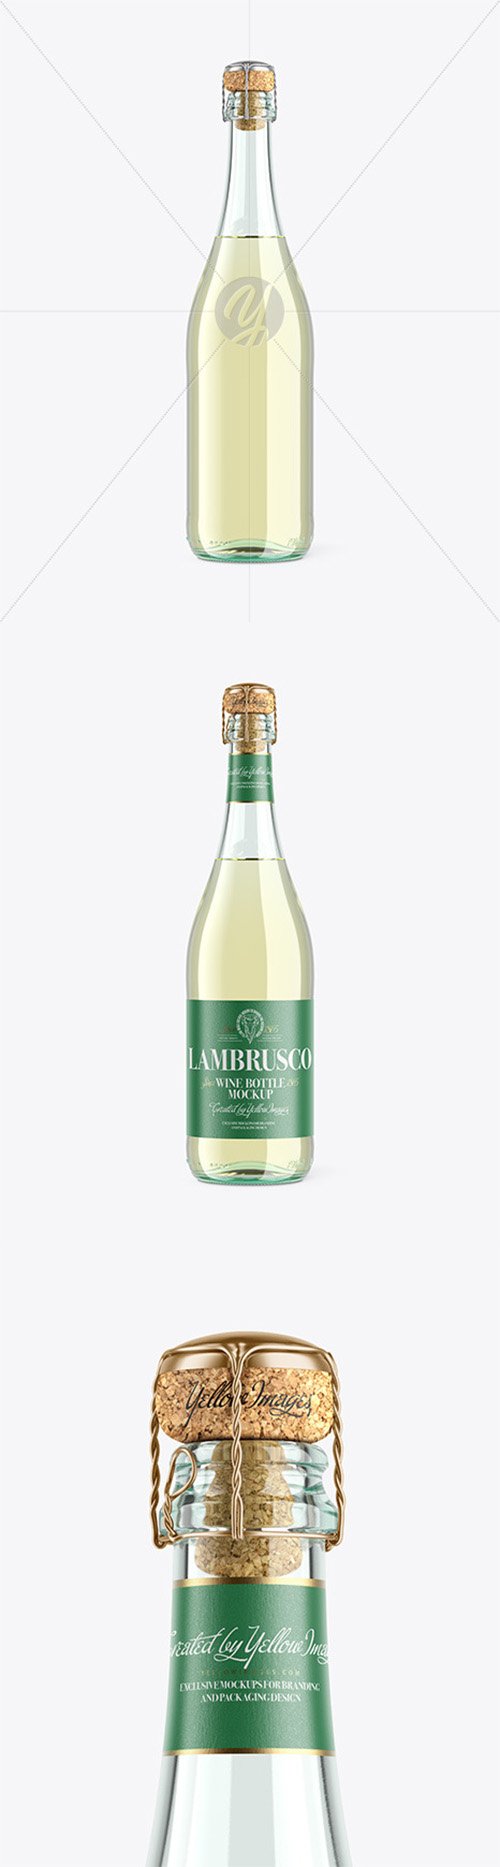 Clear Glass Lambrusco Bottle With White Wine Mockup 62602 TIF